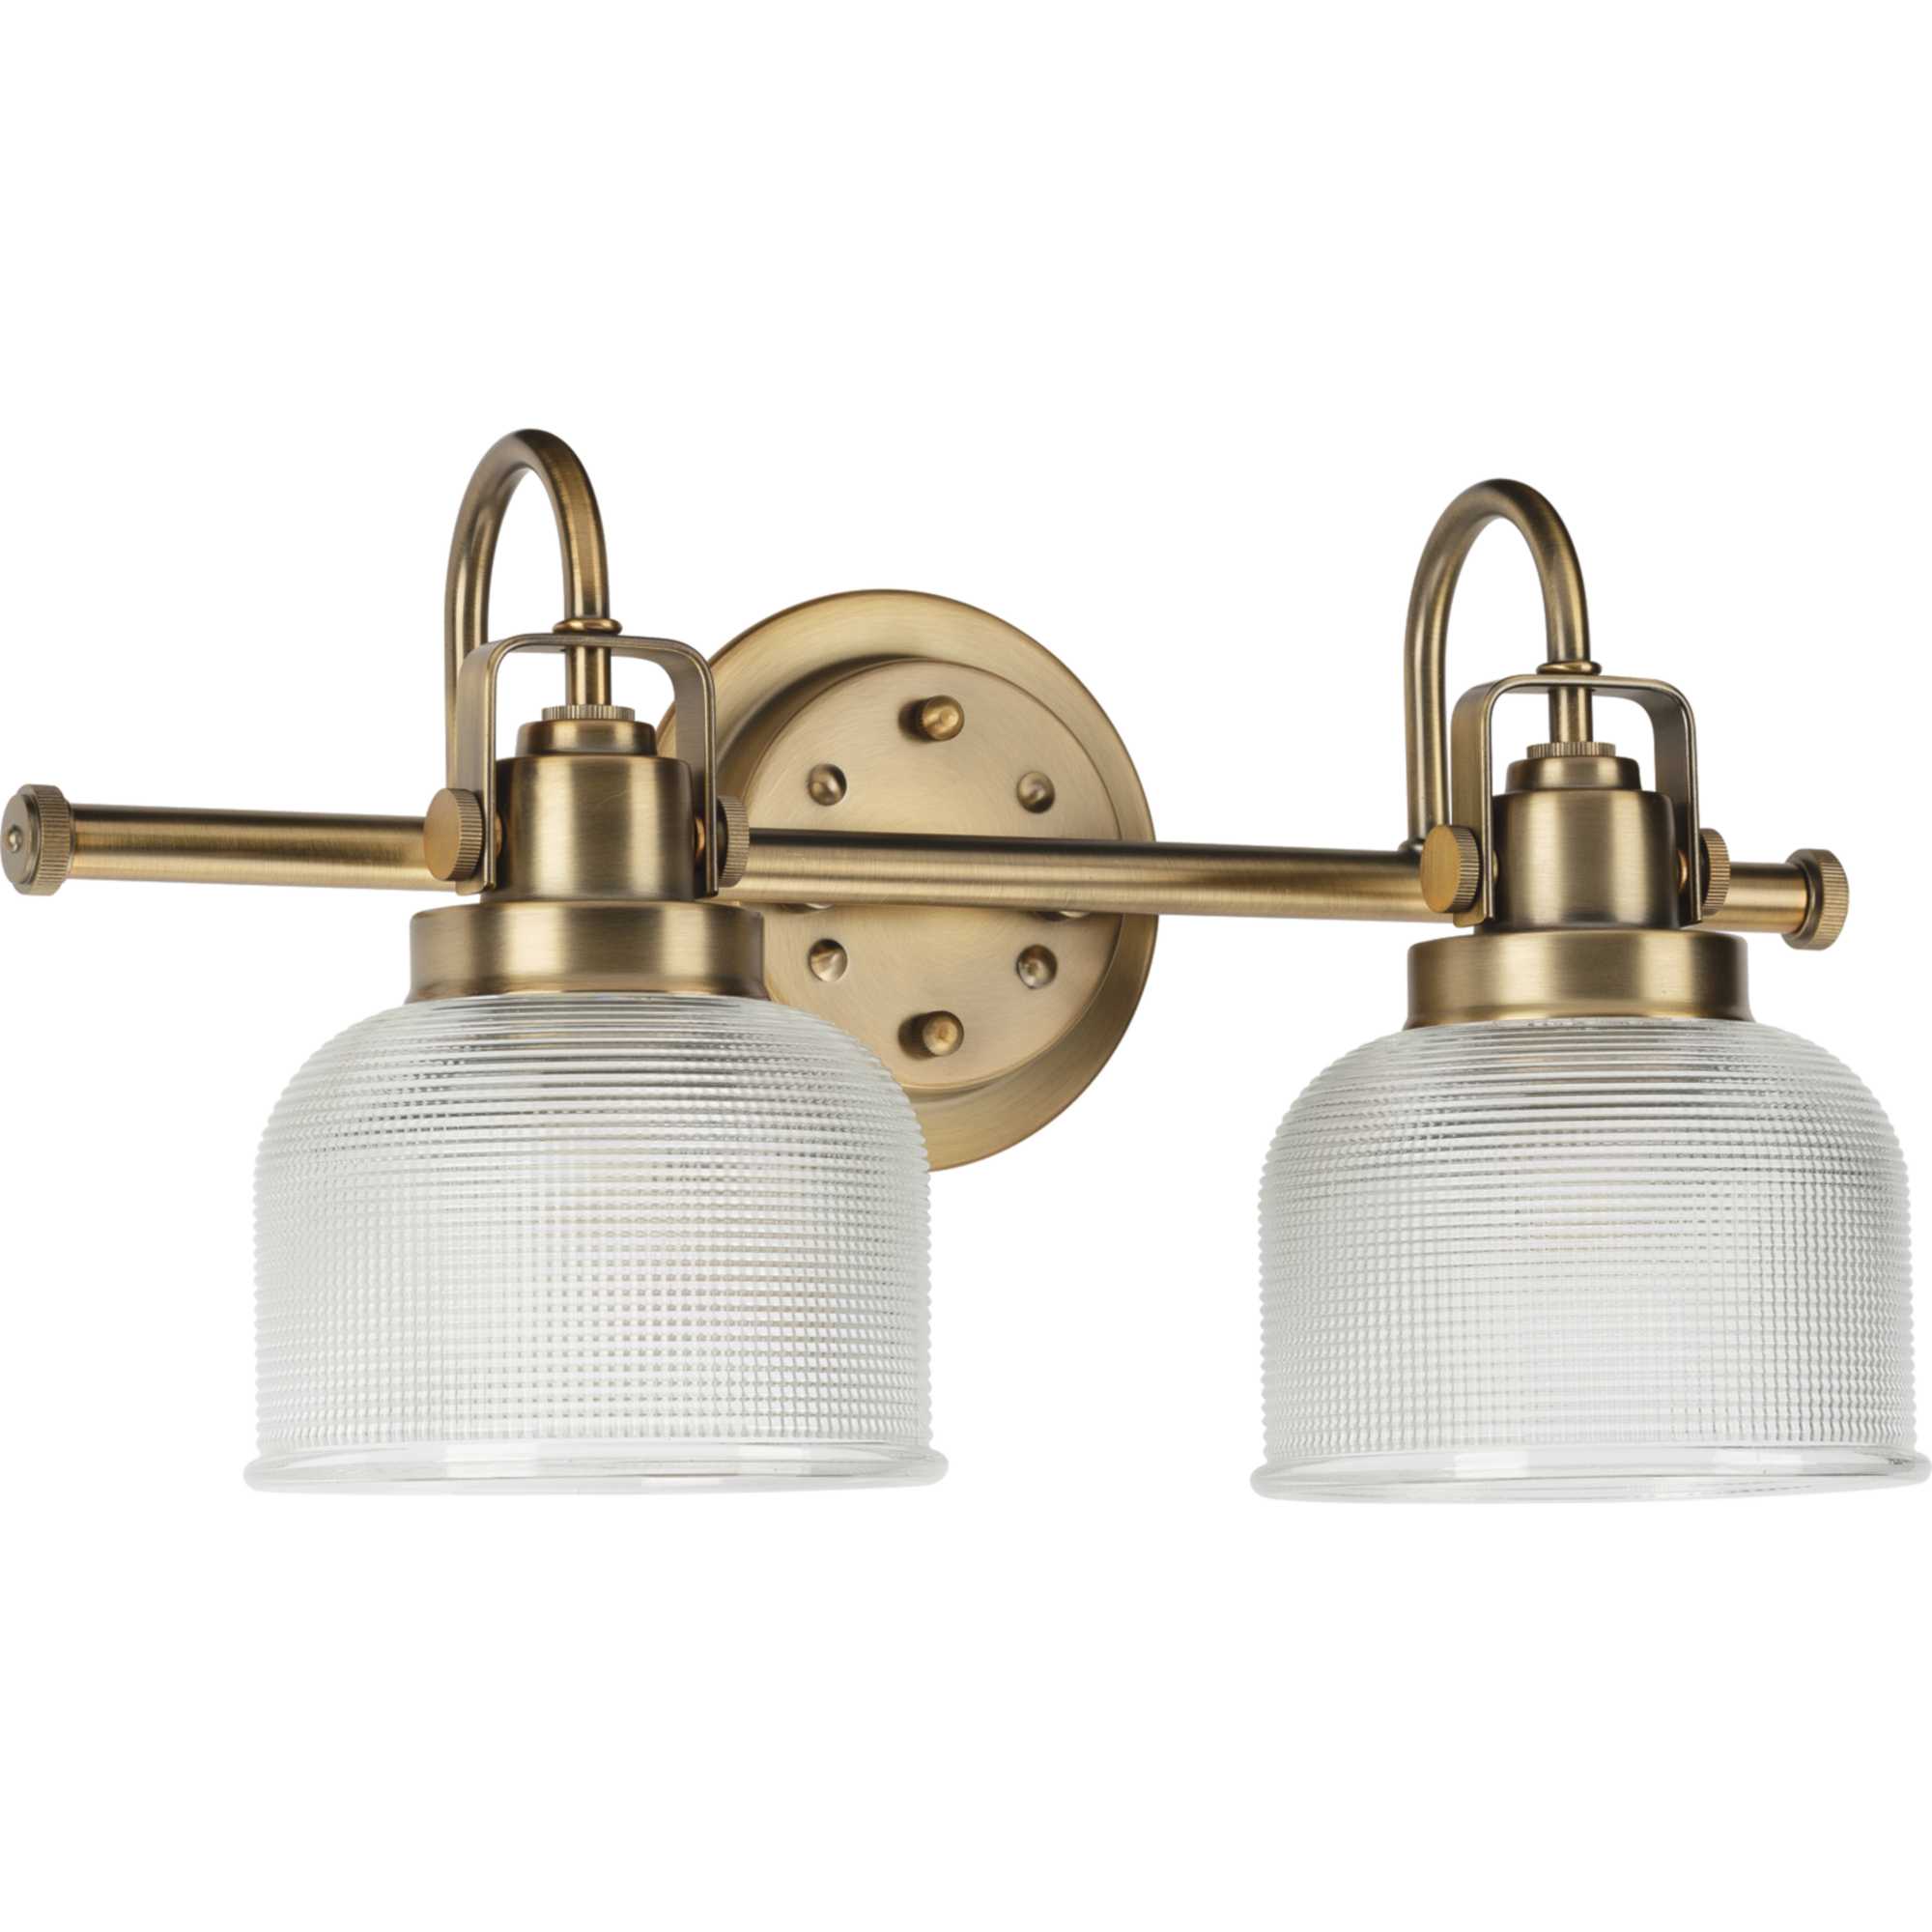 1-Light Chrome Bath Sconce Progress Lighting Archie Collection 5.75 in 